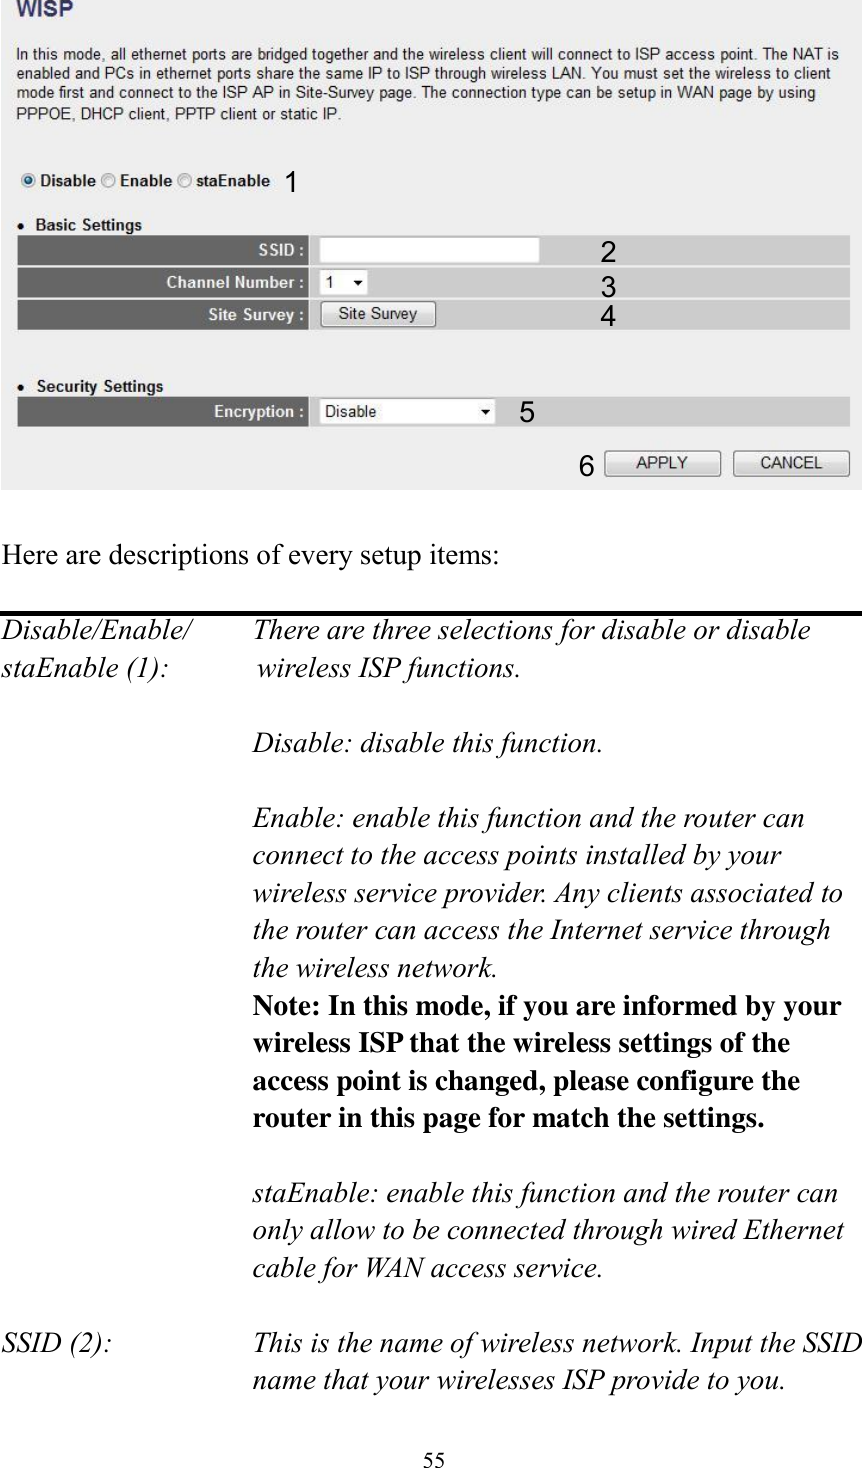 55   Here are descriptions of every setup items:  Disable/Enable/    There are three selections for disable or disable   staEnable (1):            wireless ISP functions.  Disable: disable this function.  Enable: enable this function and the router can connect to the access points installed by your wireless service provider. Any clients associated to the router can access the Internet service through the wireless network. Note: In this mode, if you are informed by your wireless ISP that the wireless settings of the access point is changed, please configure the router in this page for match the settings.  staEnable: enable this function and the router can only allow to be connected through wired Ethernet cable for WAN access service.  SSID (2):    This is the name of wireless network. Input the SSID name that your wirelesses ISP provide to you. 1 2 3 4 5 6 